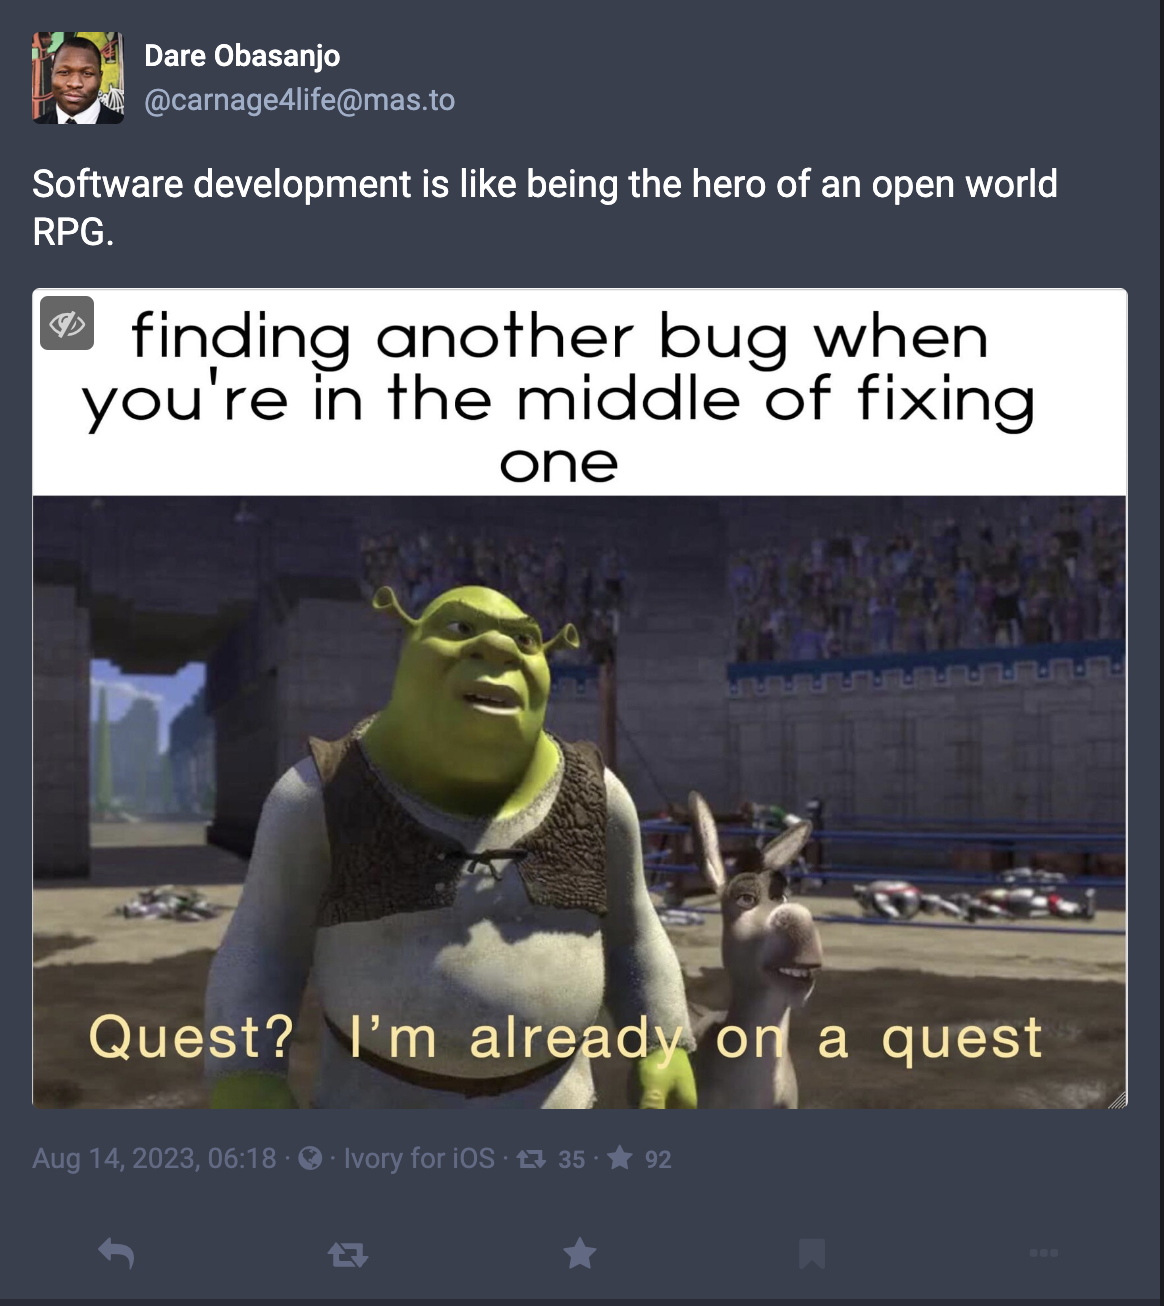 Software development is like being the hero of an open world RPG. Image of Shrek and Donkey saying finding another bug when you're in the middle of fixing one: "Quest? I'm already on a quest"